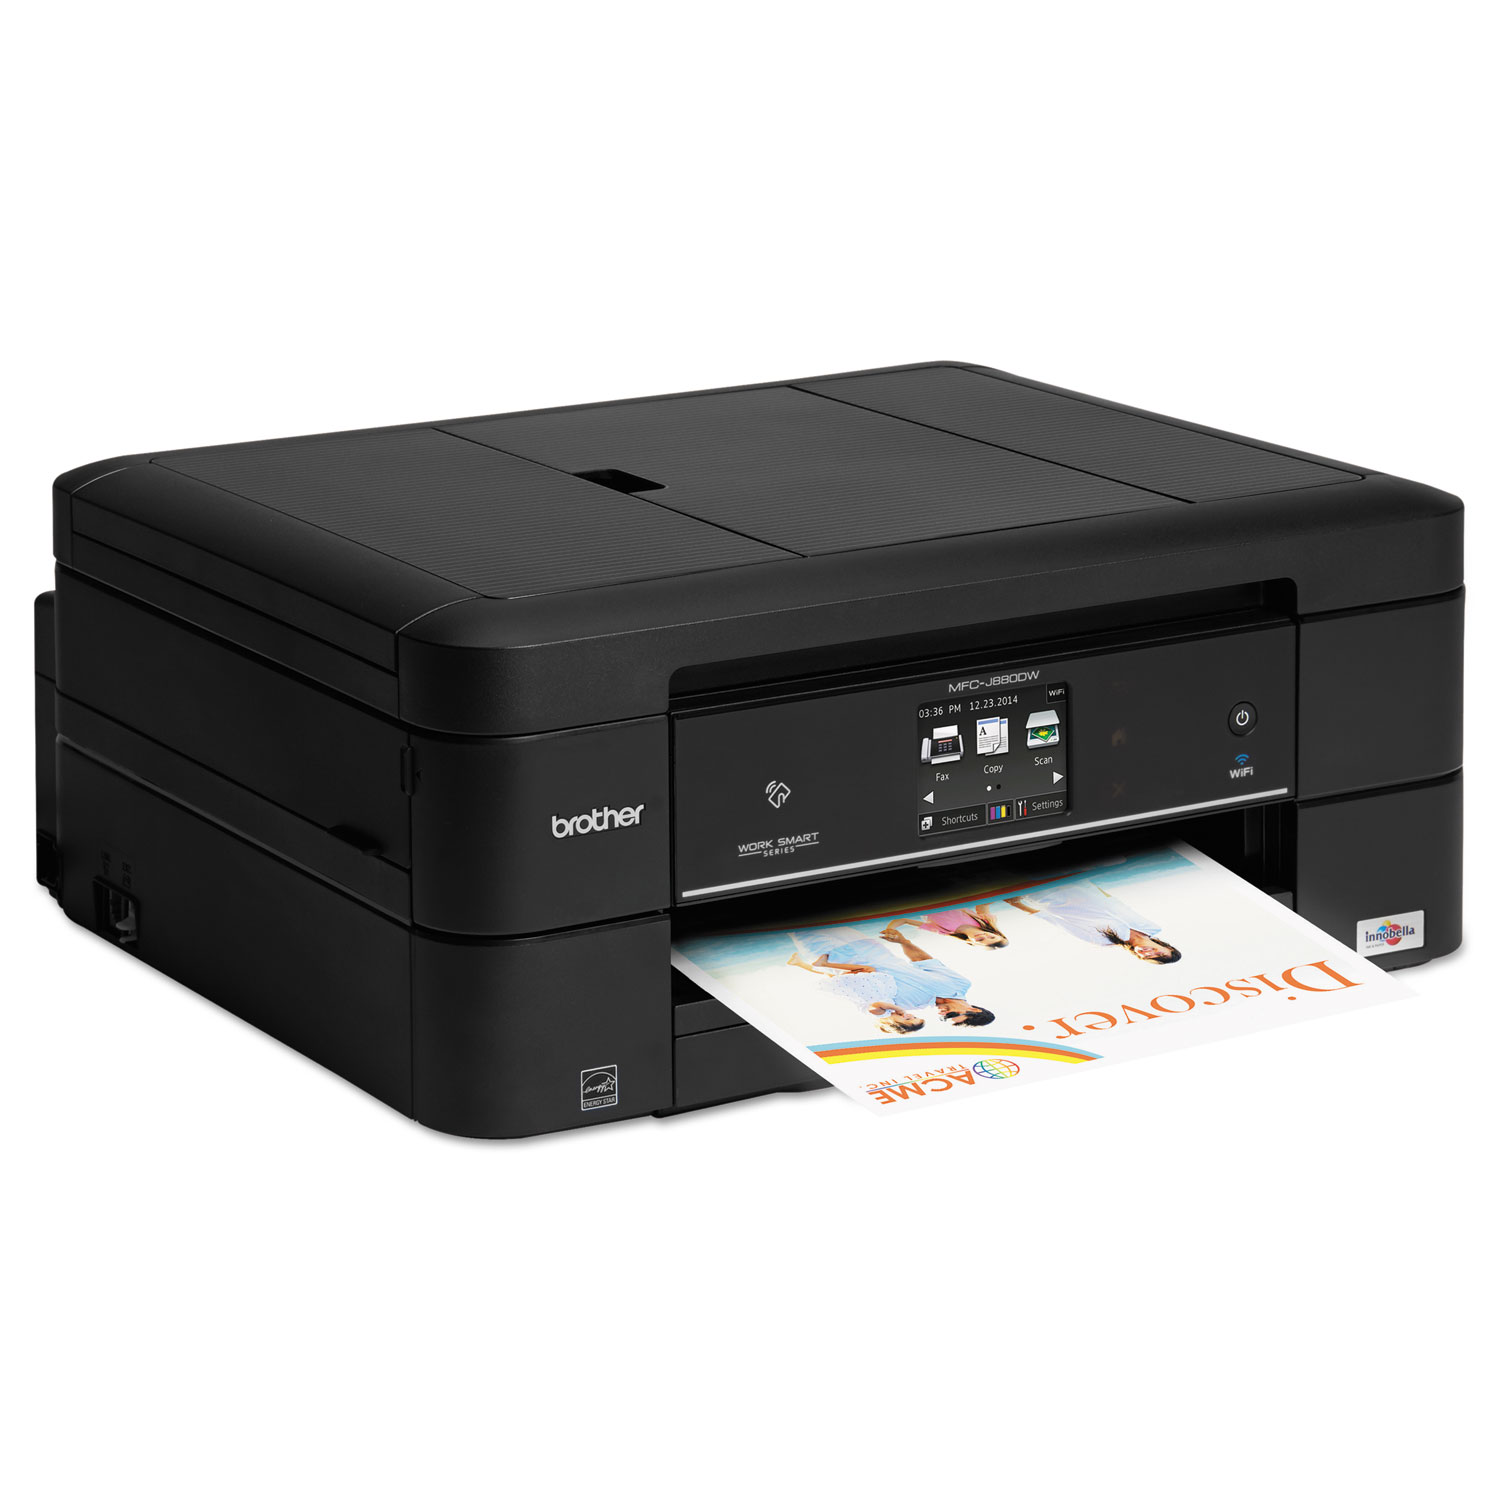 Work Smart MFC-J880DW Compact Wi-Fi Color Inkjet All-in-One, Copy/Fax/Print/Scan